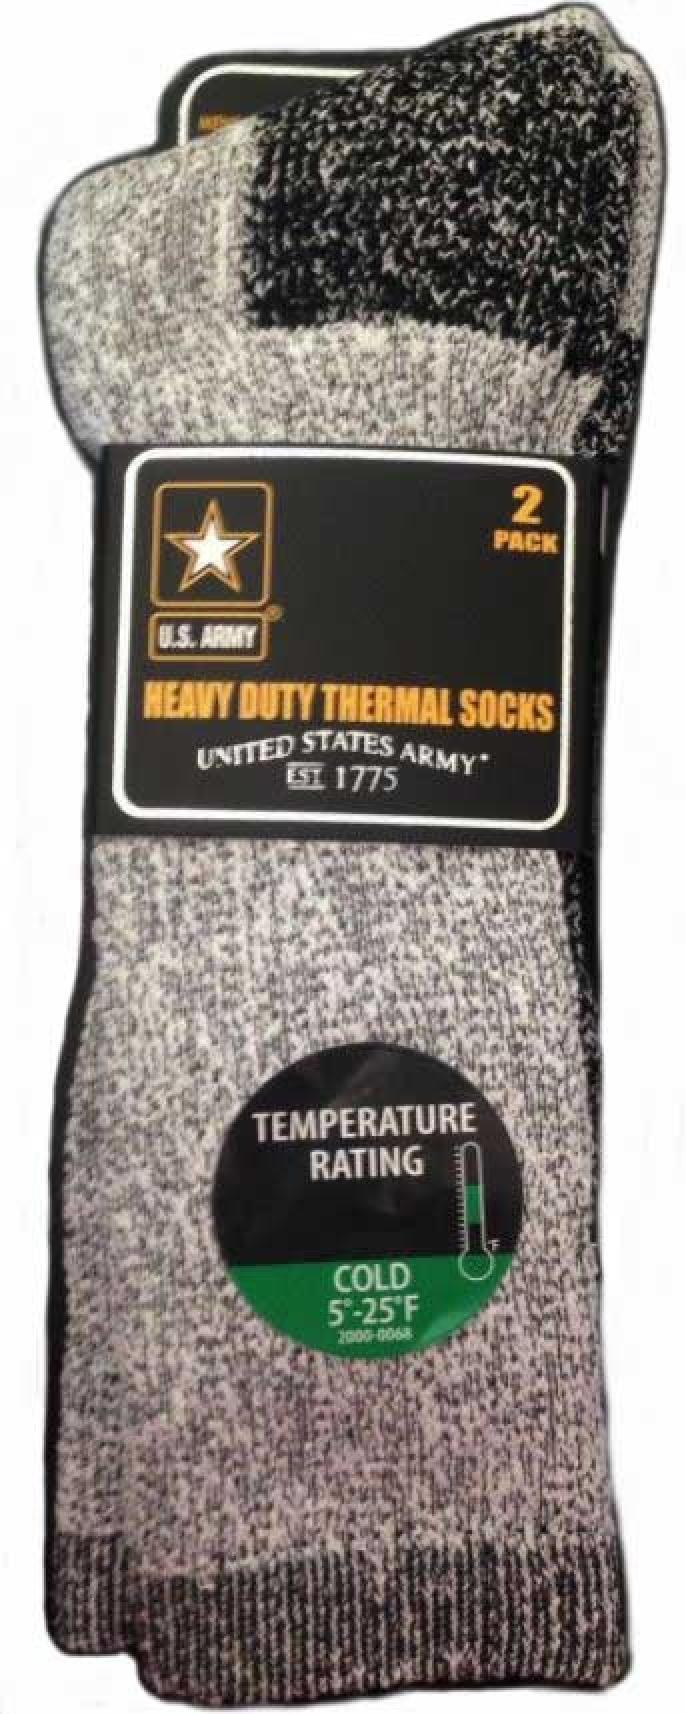 US Army 2 Pack Thermal Sock Close Up